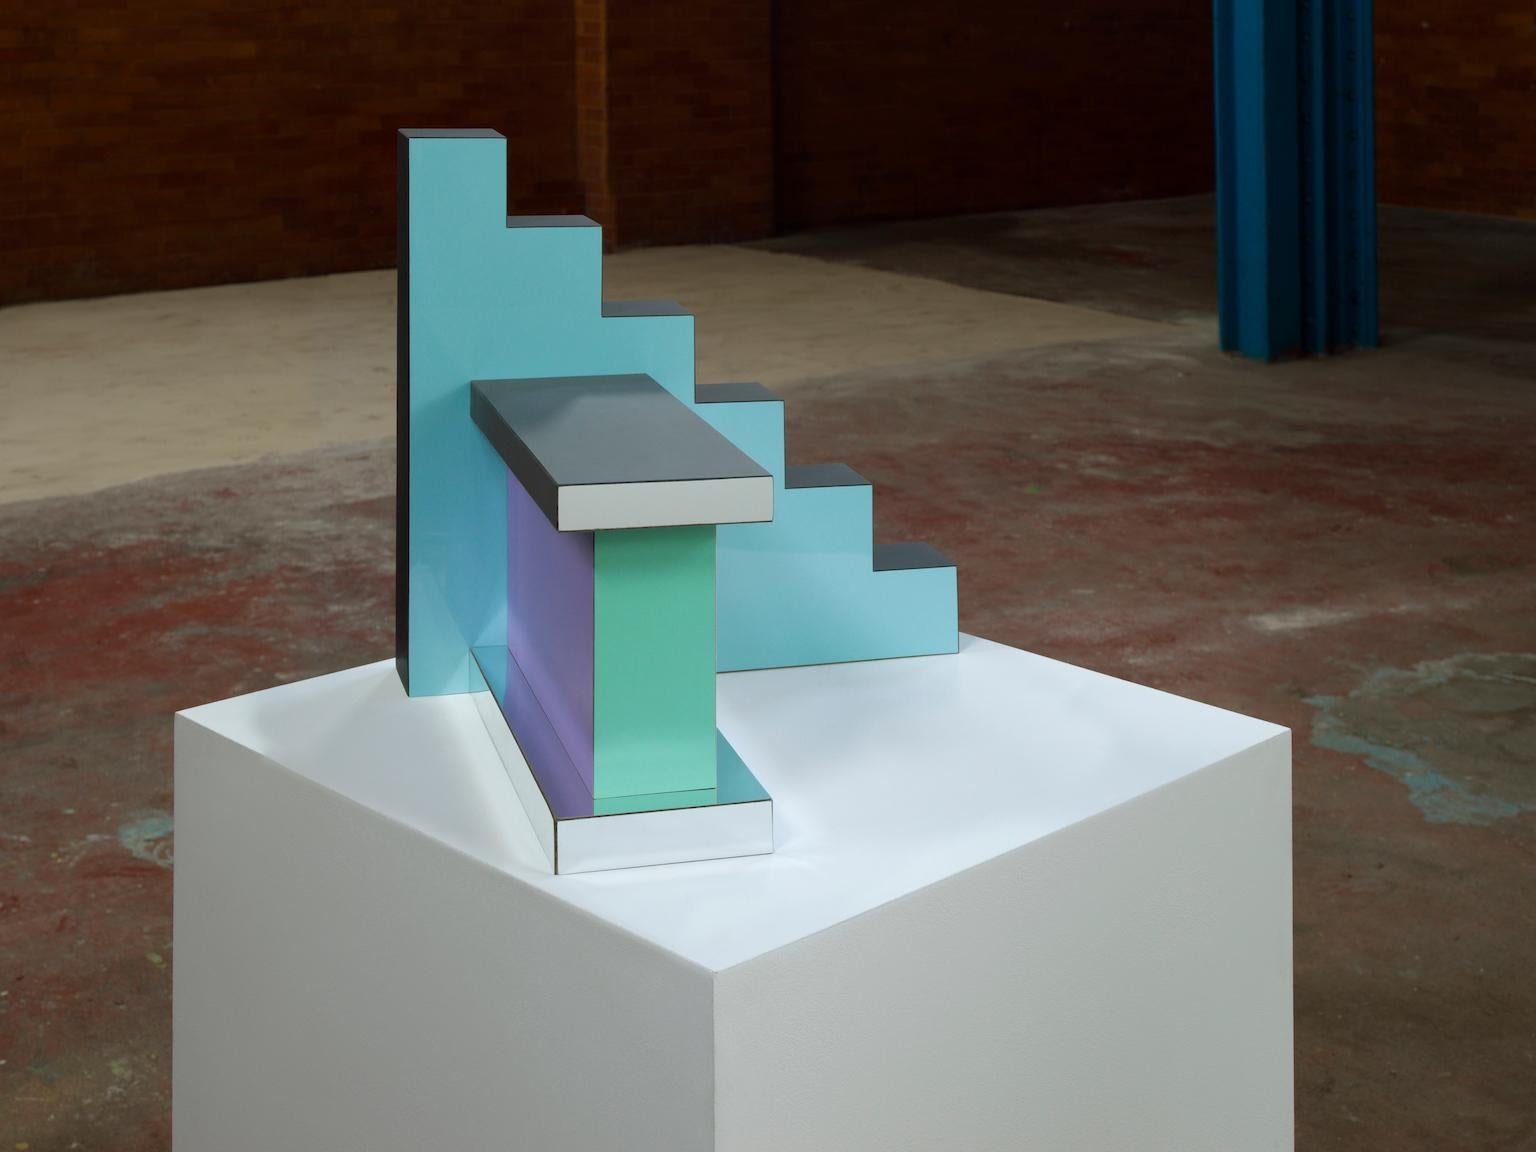 The Ziggurat series (of four) are smaller scale investigations into color, planes and form. Each Ziggurat as a unique, one-off sculpture, completely handmade and finished by Russell Bamber. The chequerboard ziggurat side panel is inspired by marble